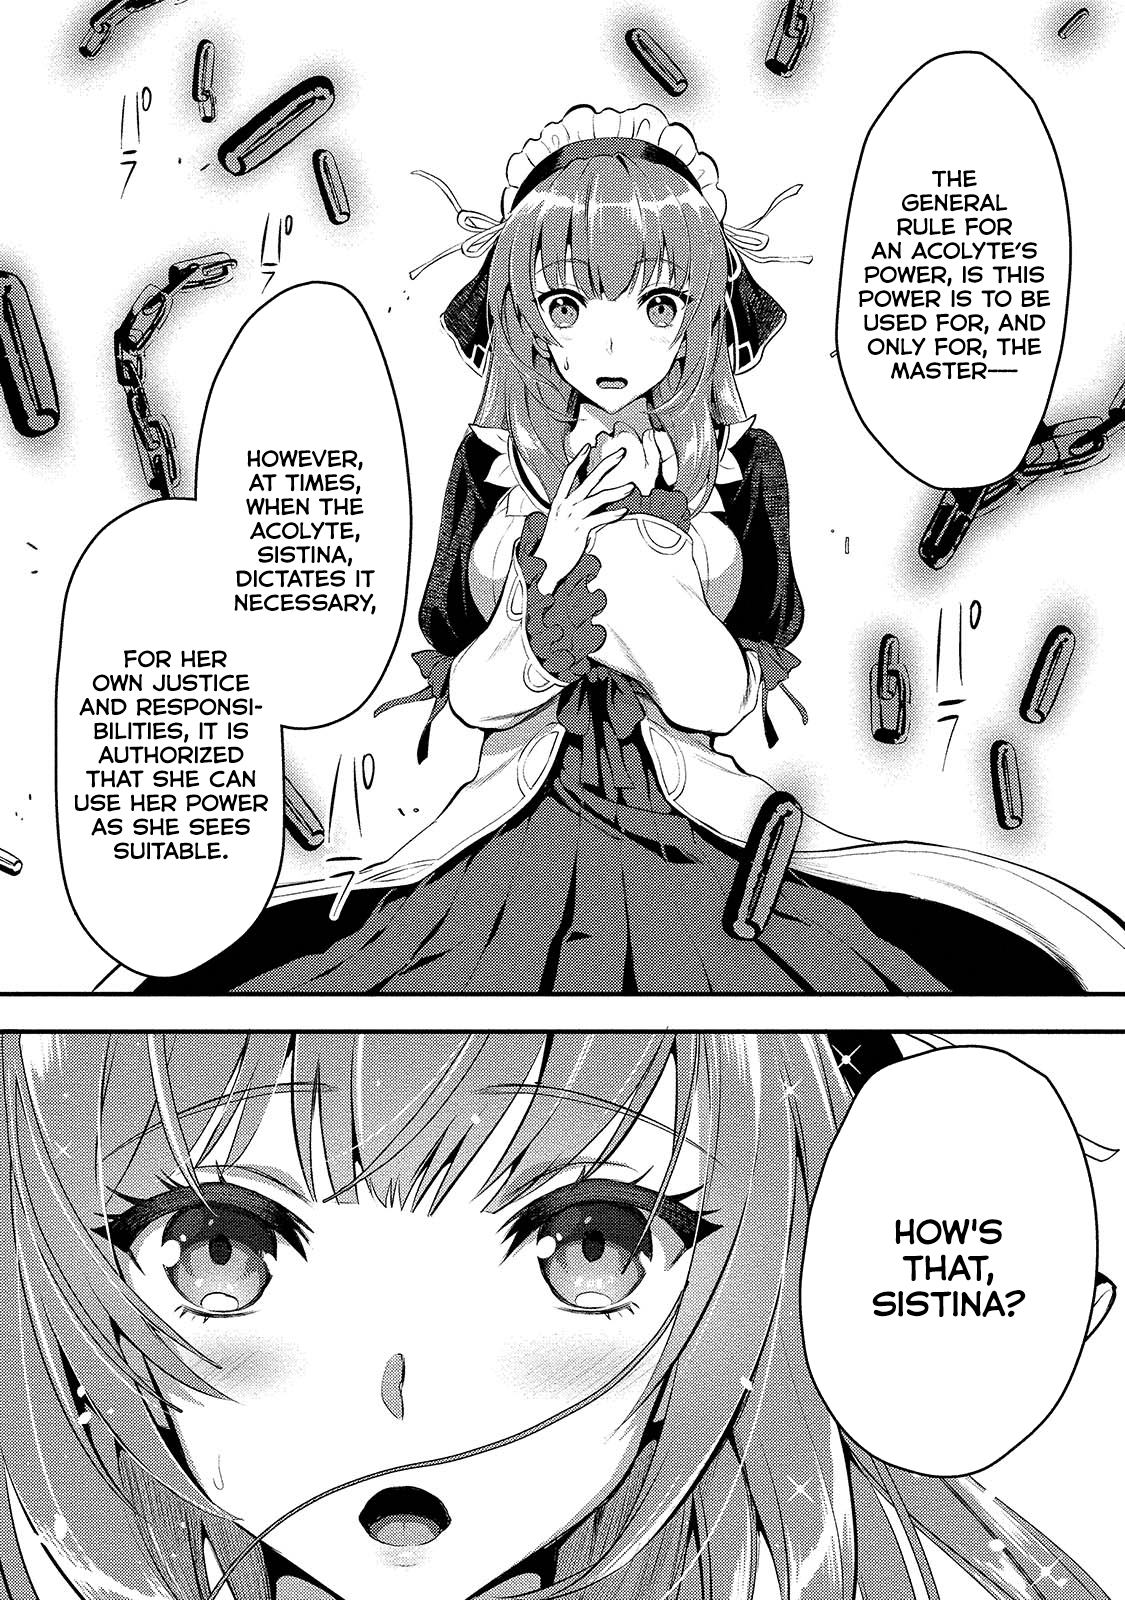 The Cursed Sword Master’S Harem Life: By The Sword, For The Sword, Cursed Sword Master Chapter 5